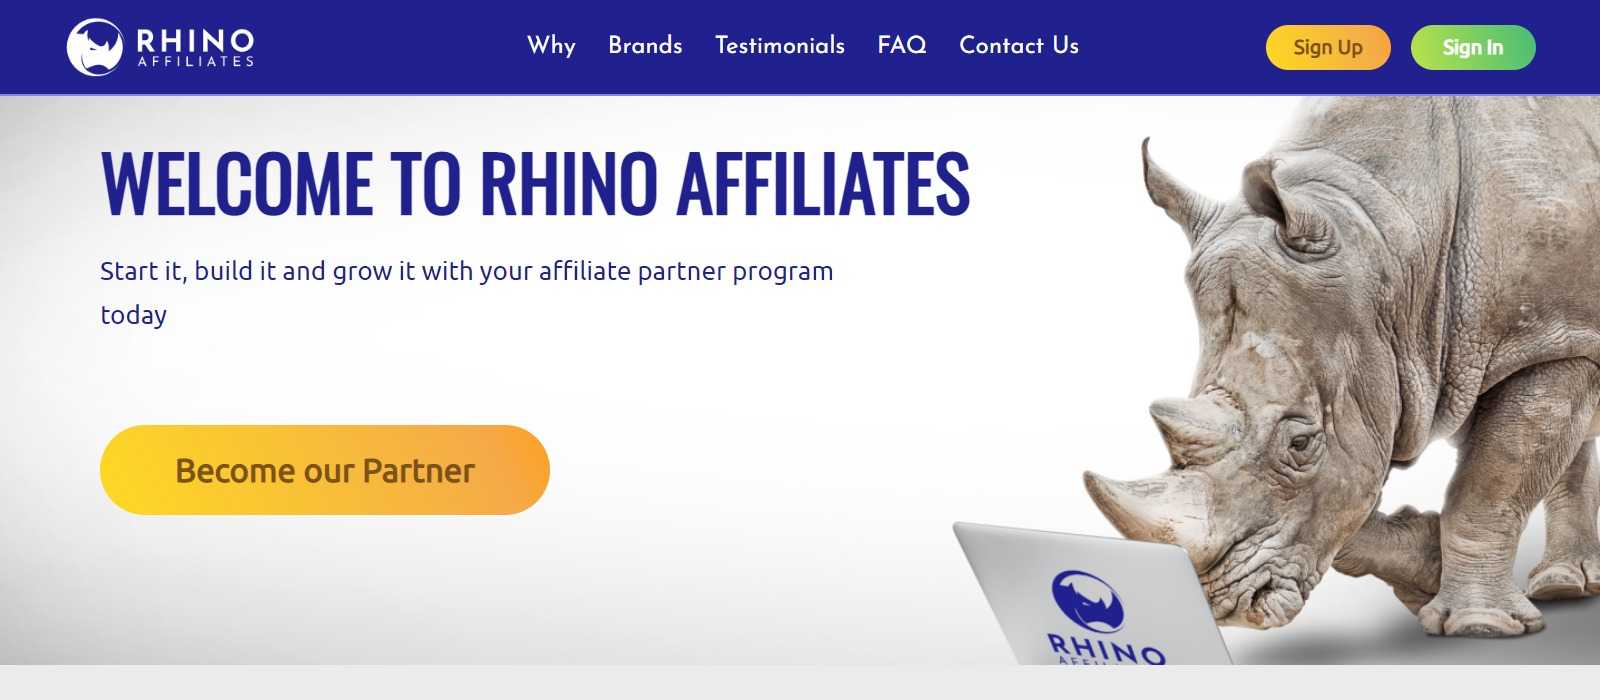 Rhino Affiliates Program Review: Earn Up To 25% - 45% Recurring Revenue Share